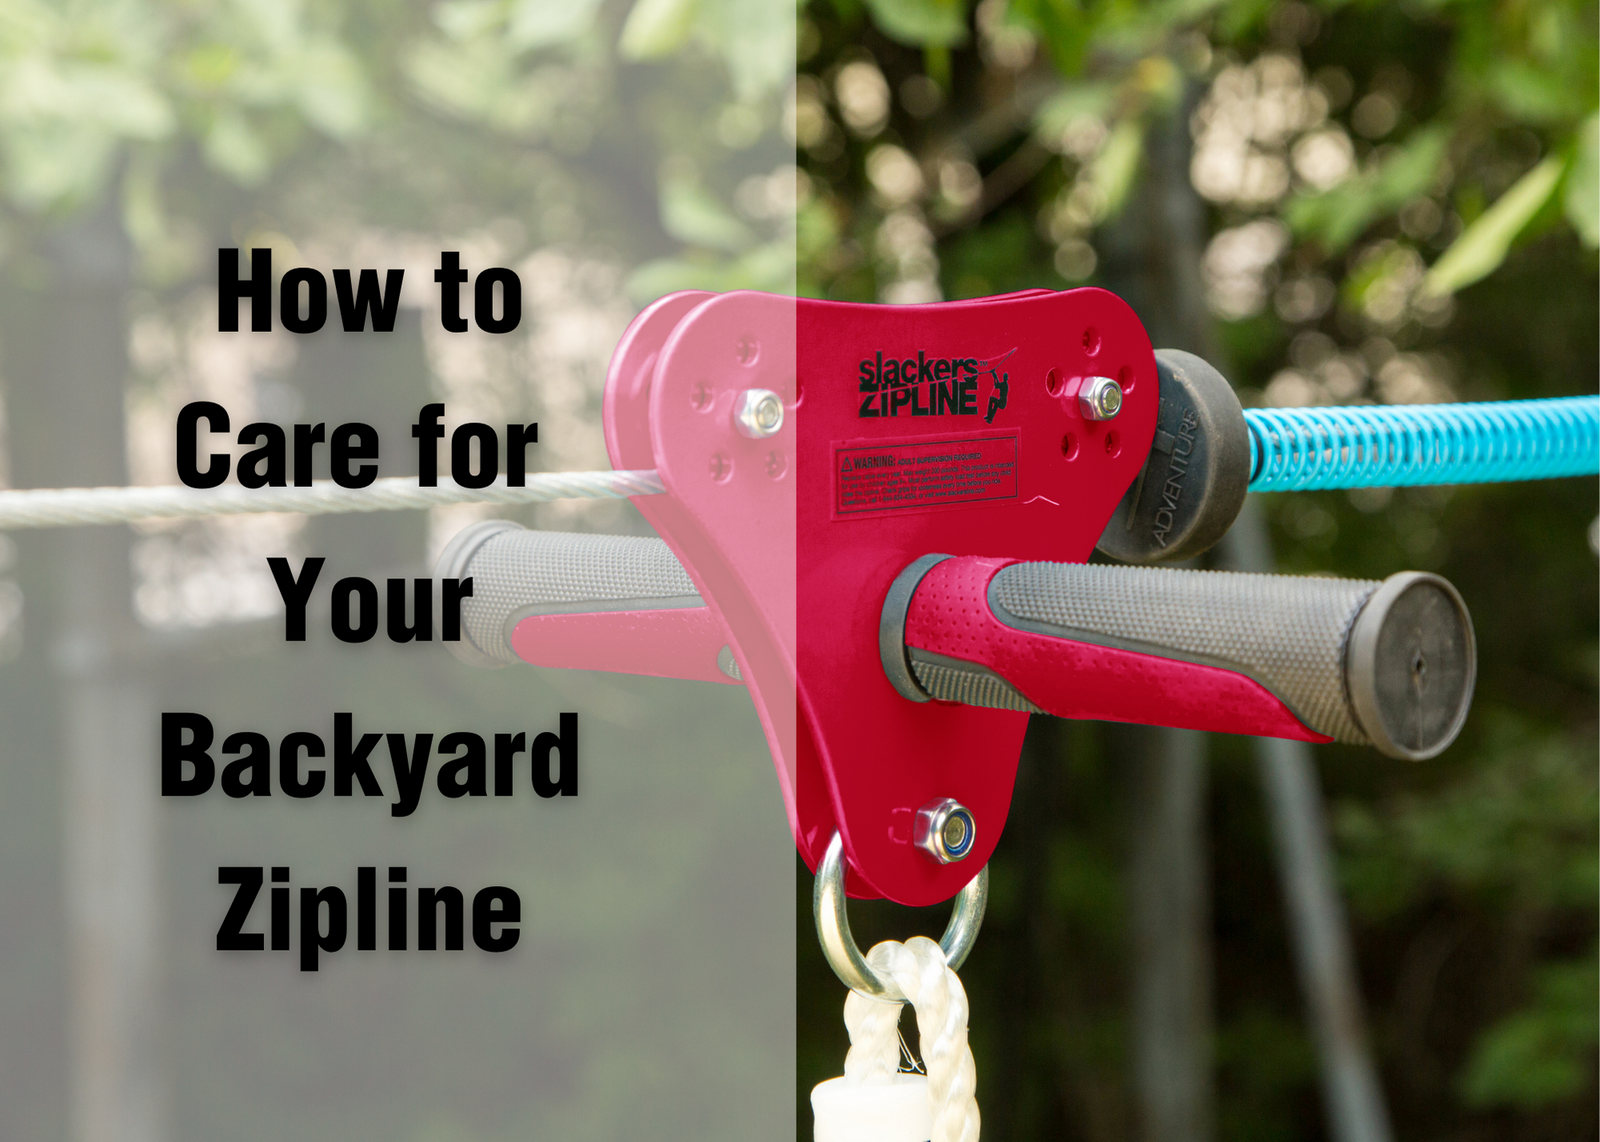 How to Care for Your Backyard Zipline